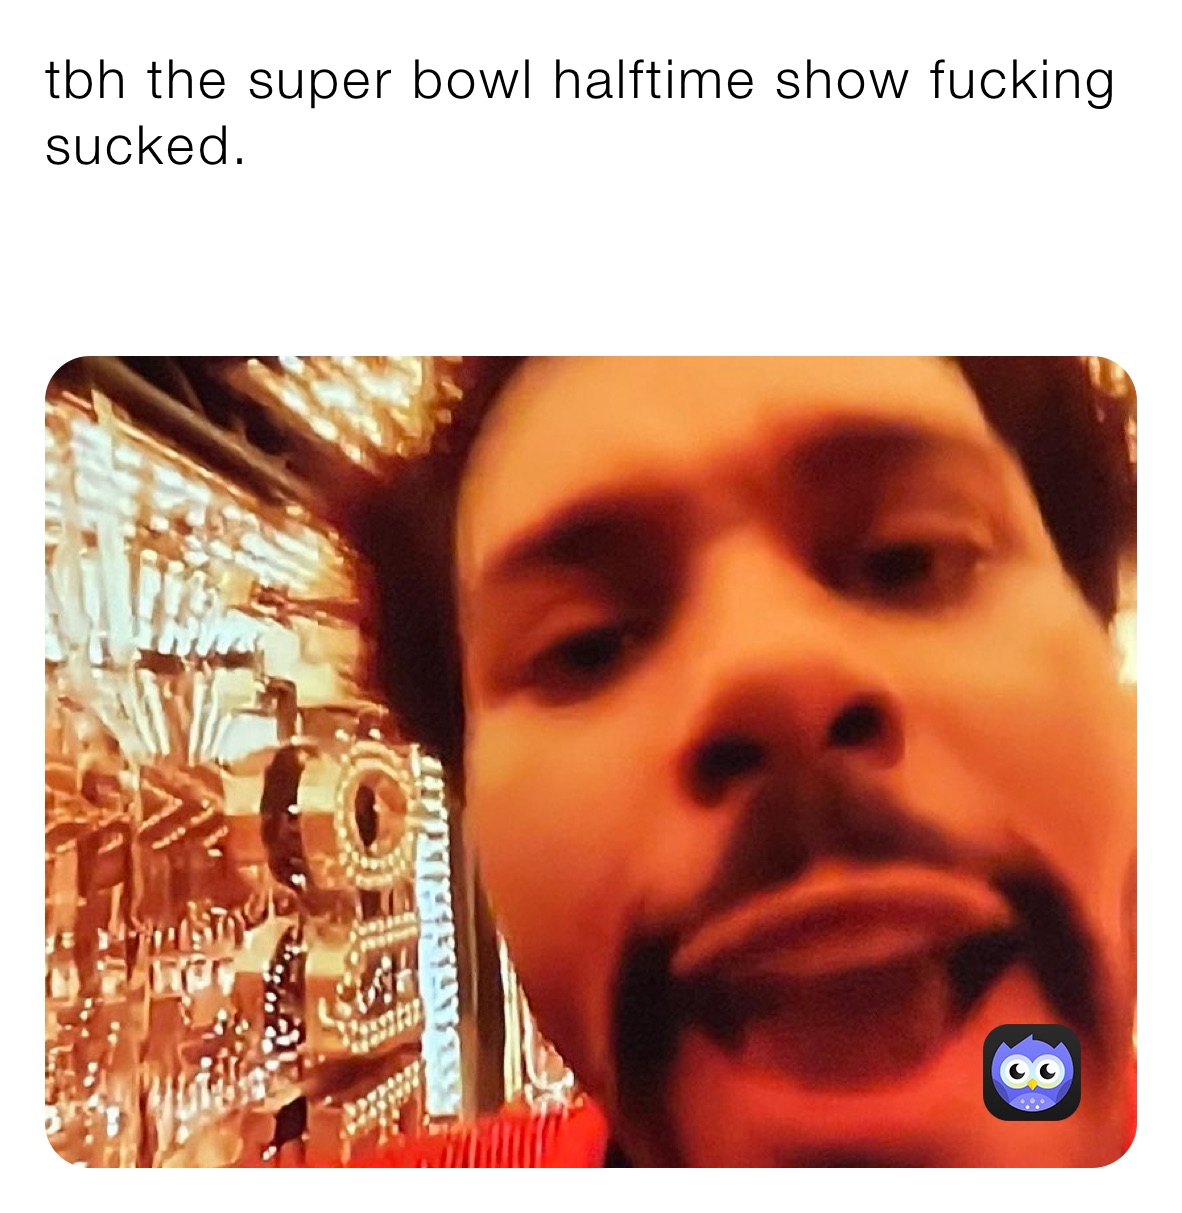 tbh the super bowl halftime show fucking sucked.

